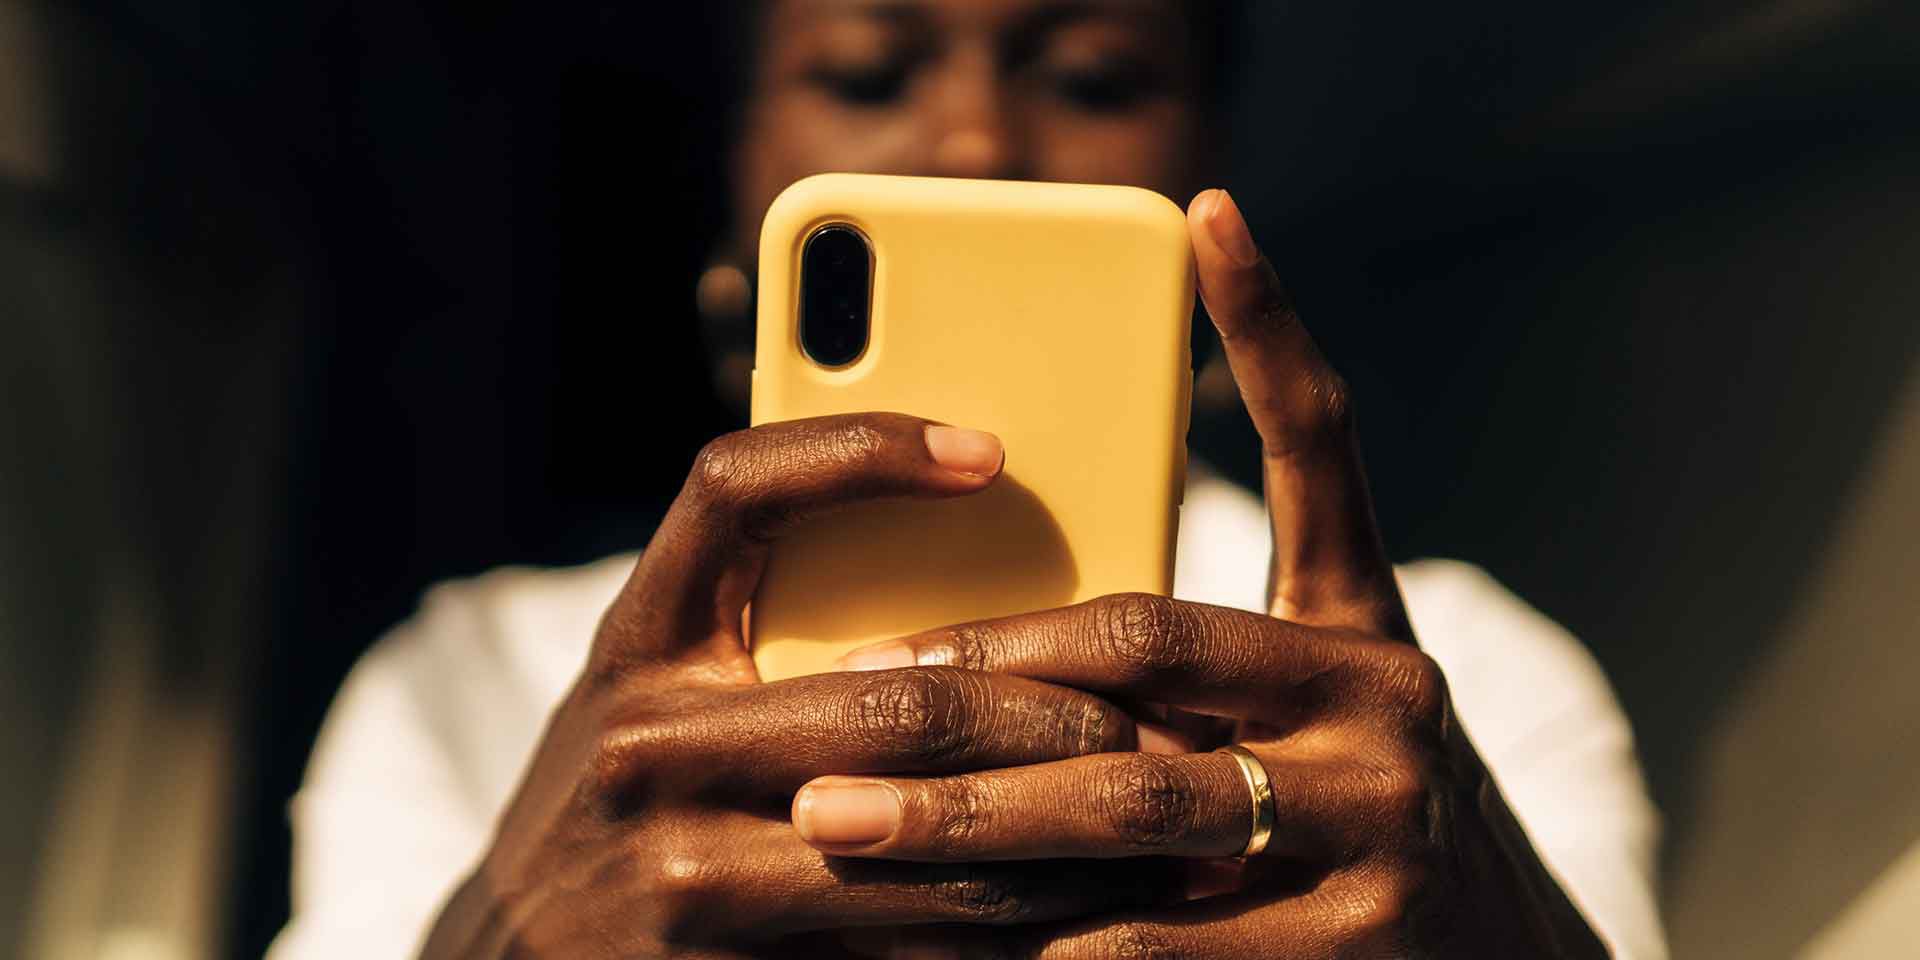 view from below of a black woman's hands with a mobile phone.